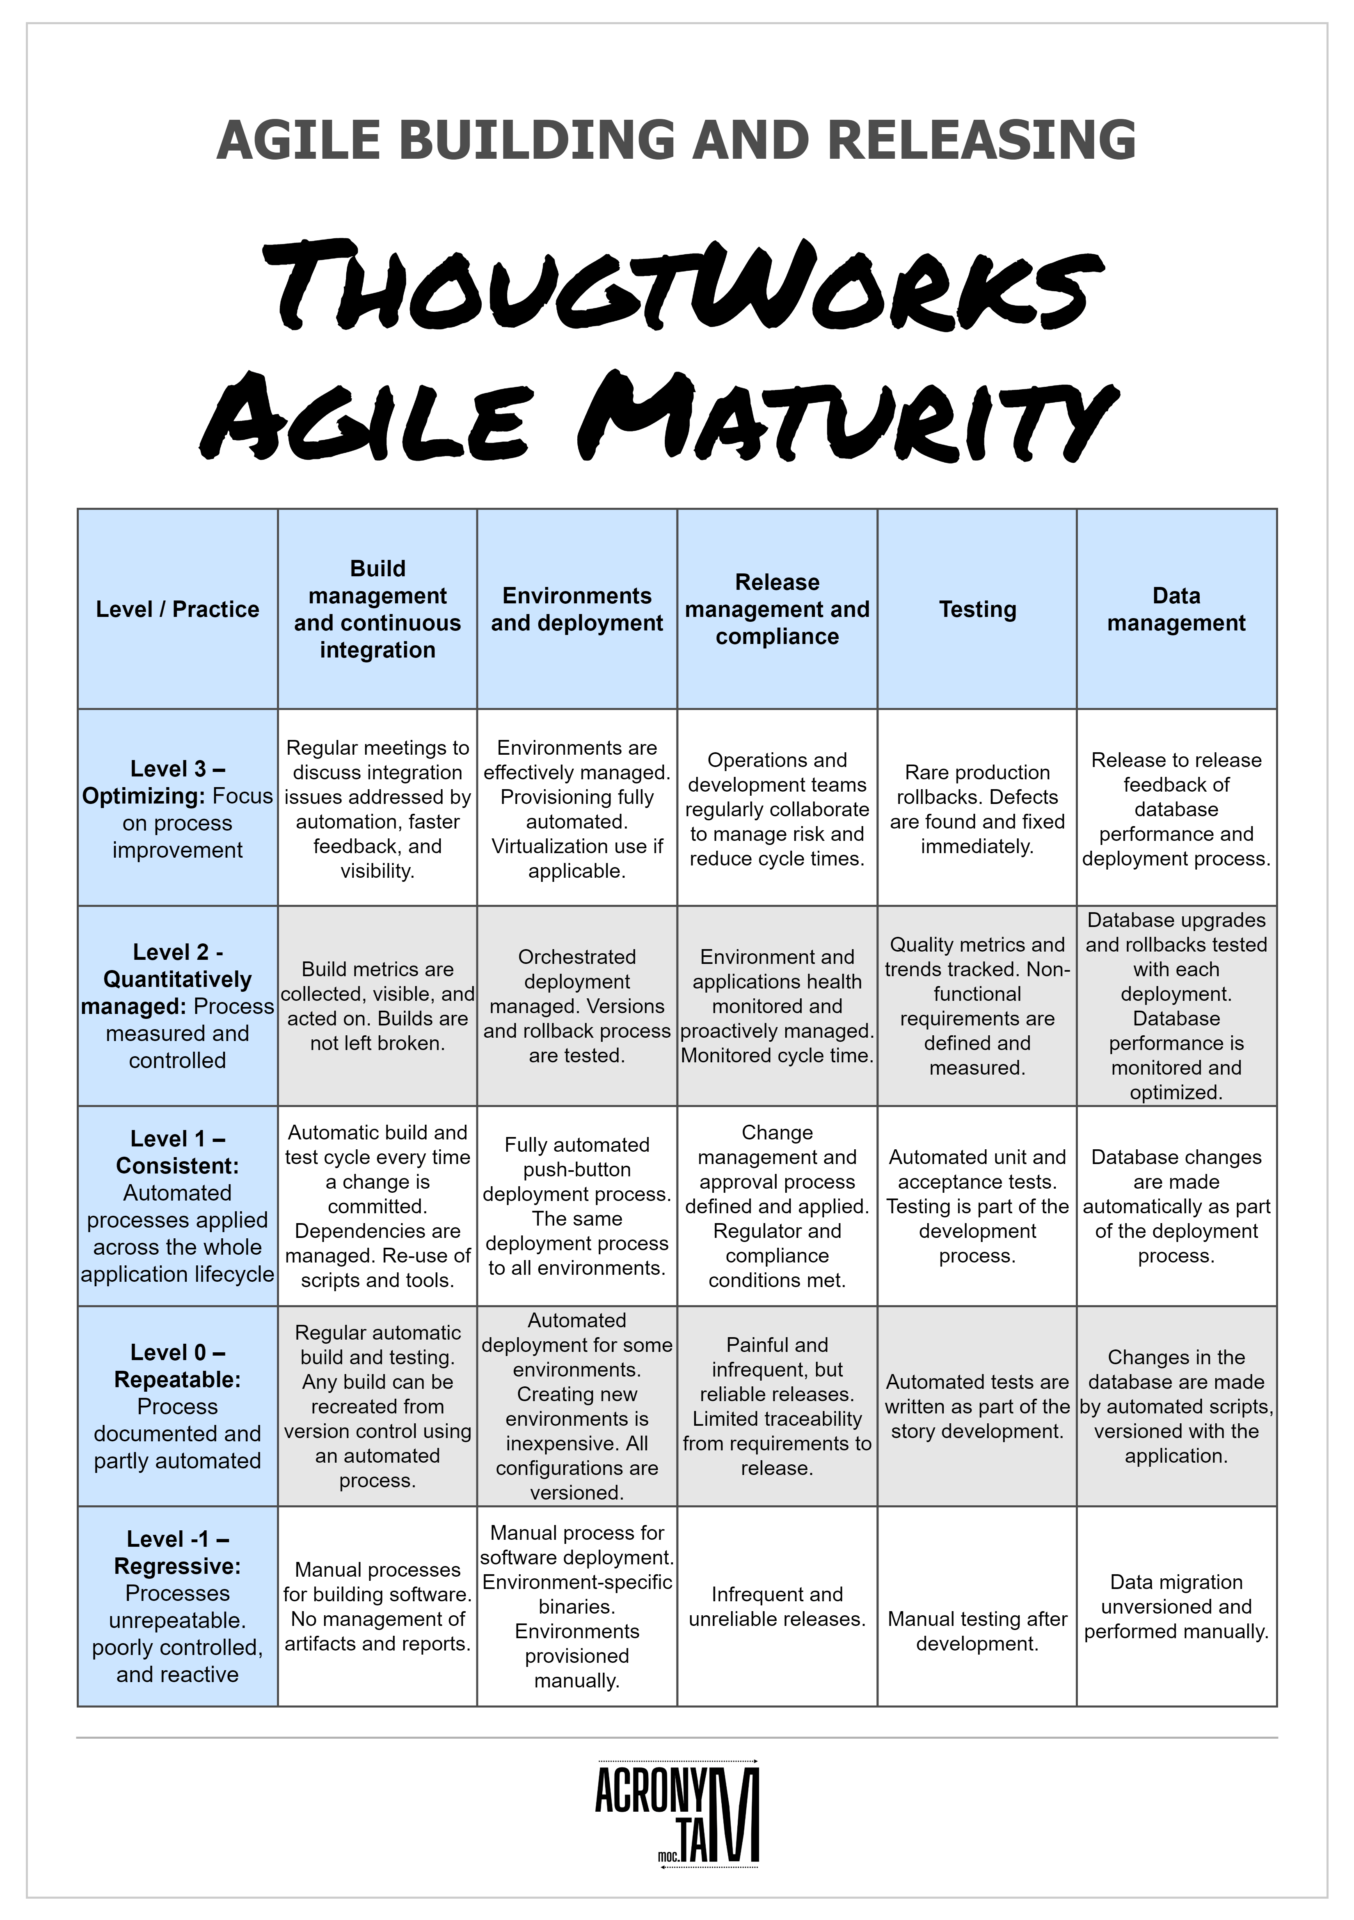 ThoughtWorks Agile Maturity Model